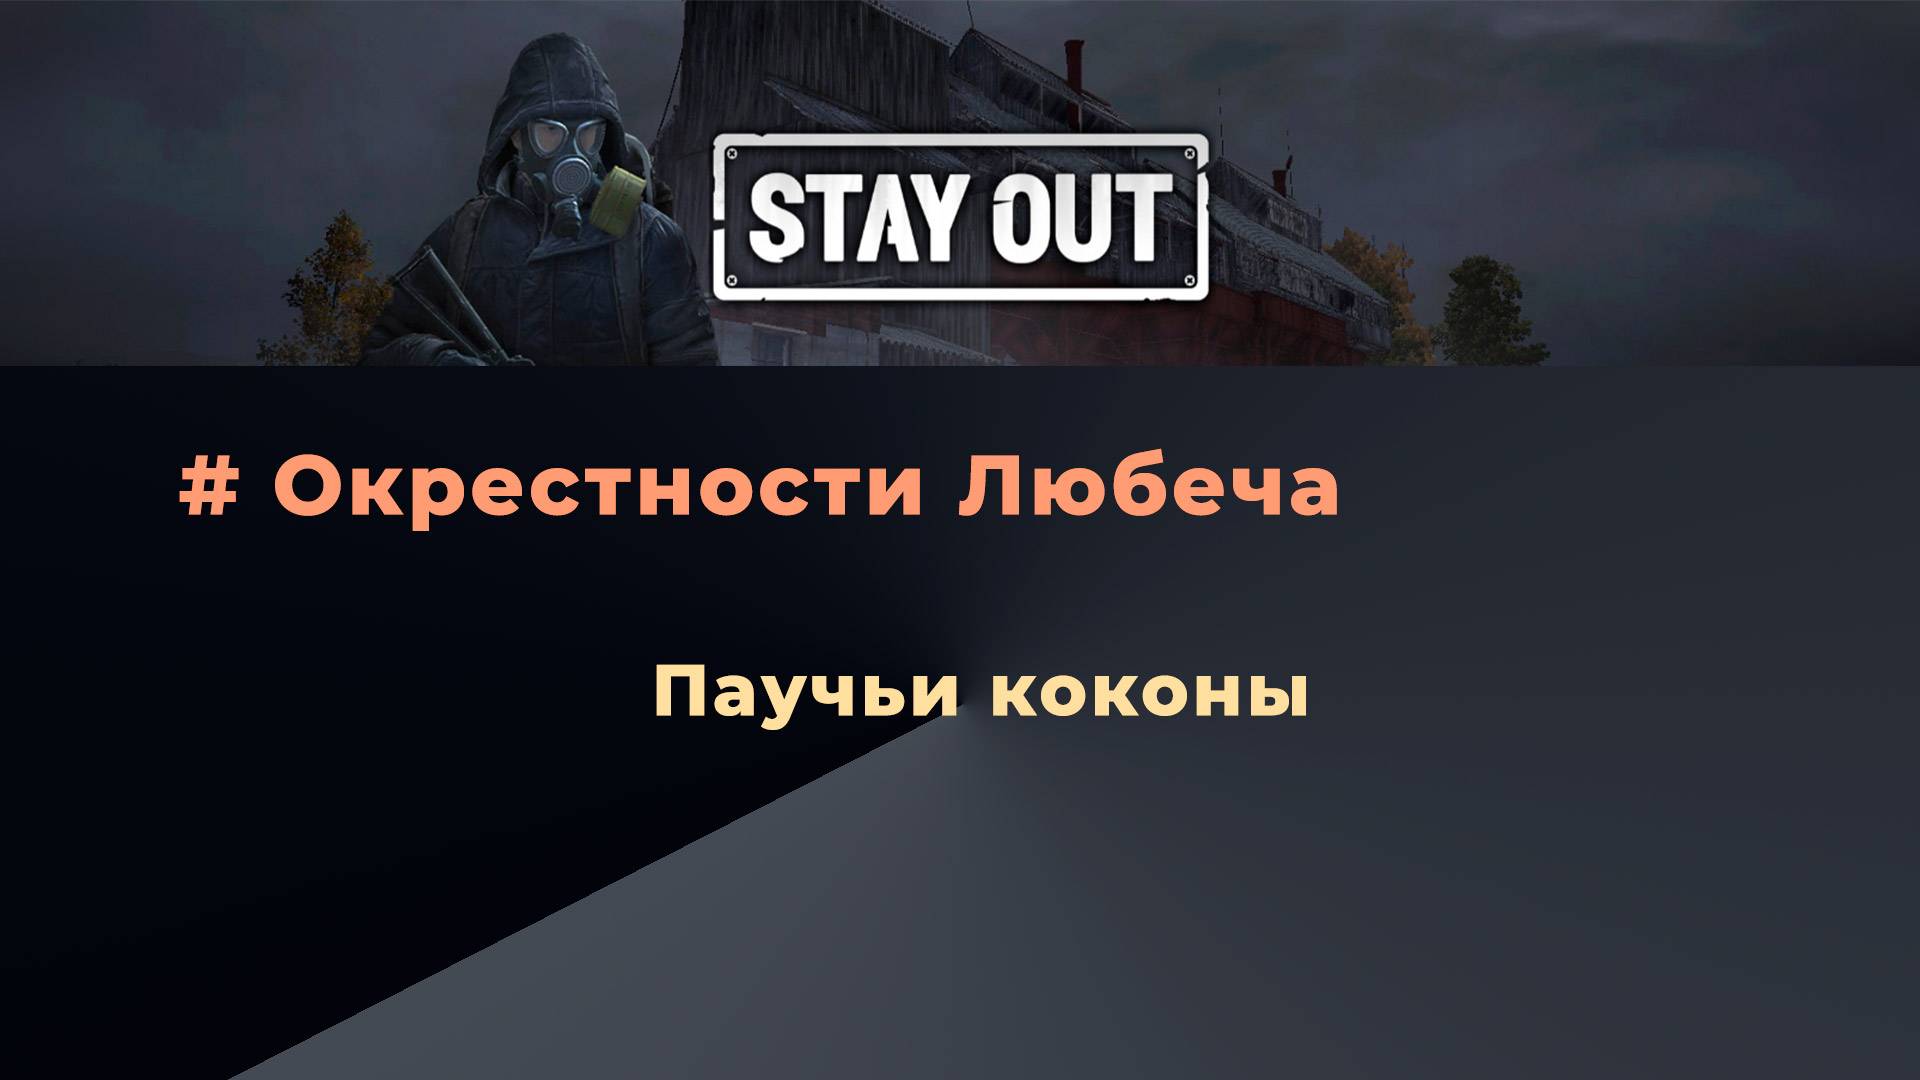 Stay Out_Паучьи коконы